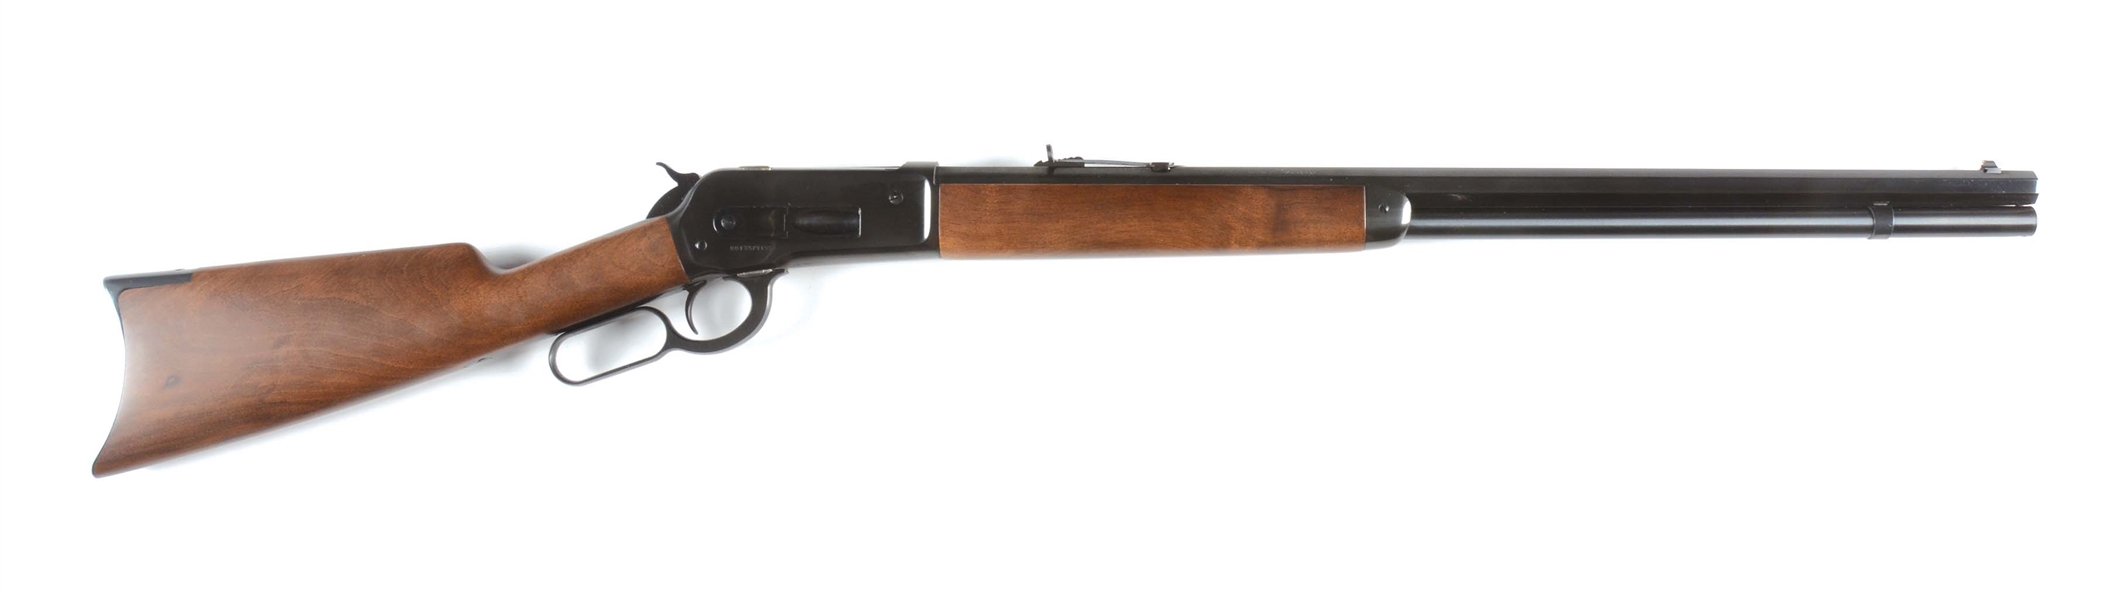 (M) AS NEW BROWNING MODEL 1886 LEVER ACTION RIFLE WITH BOX.